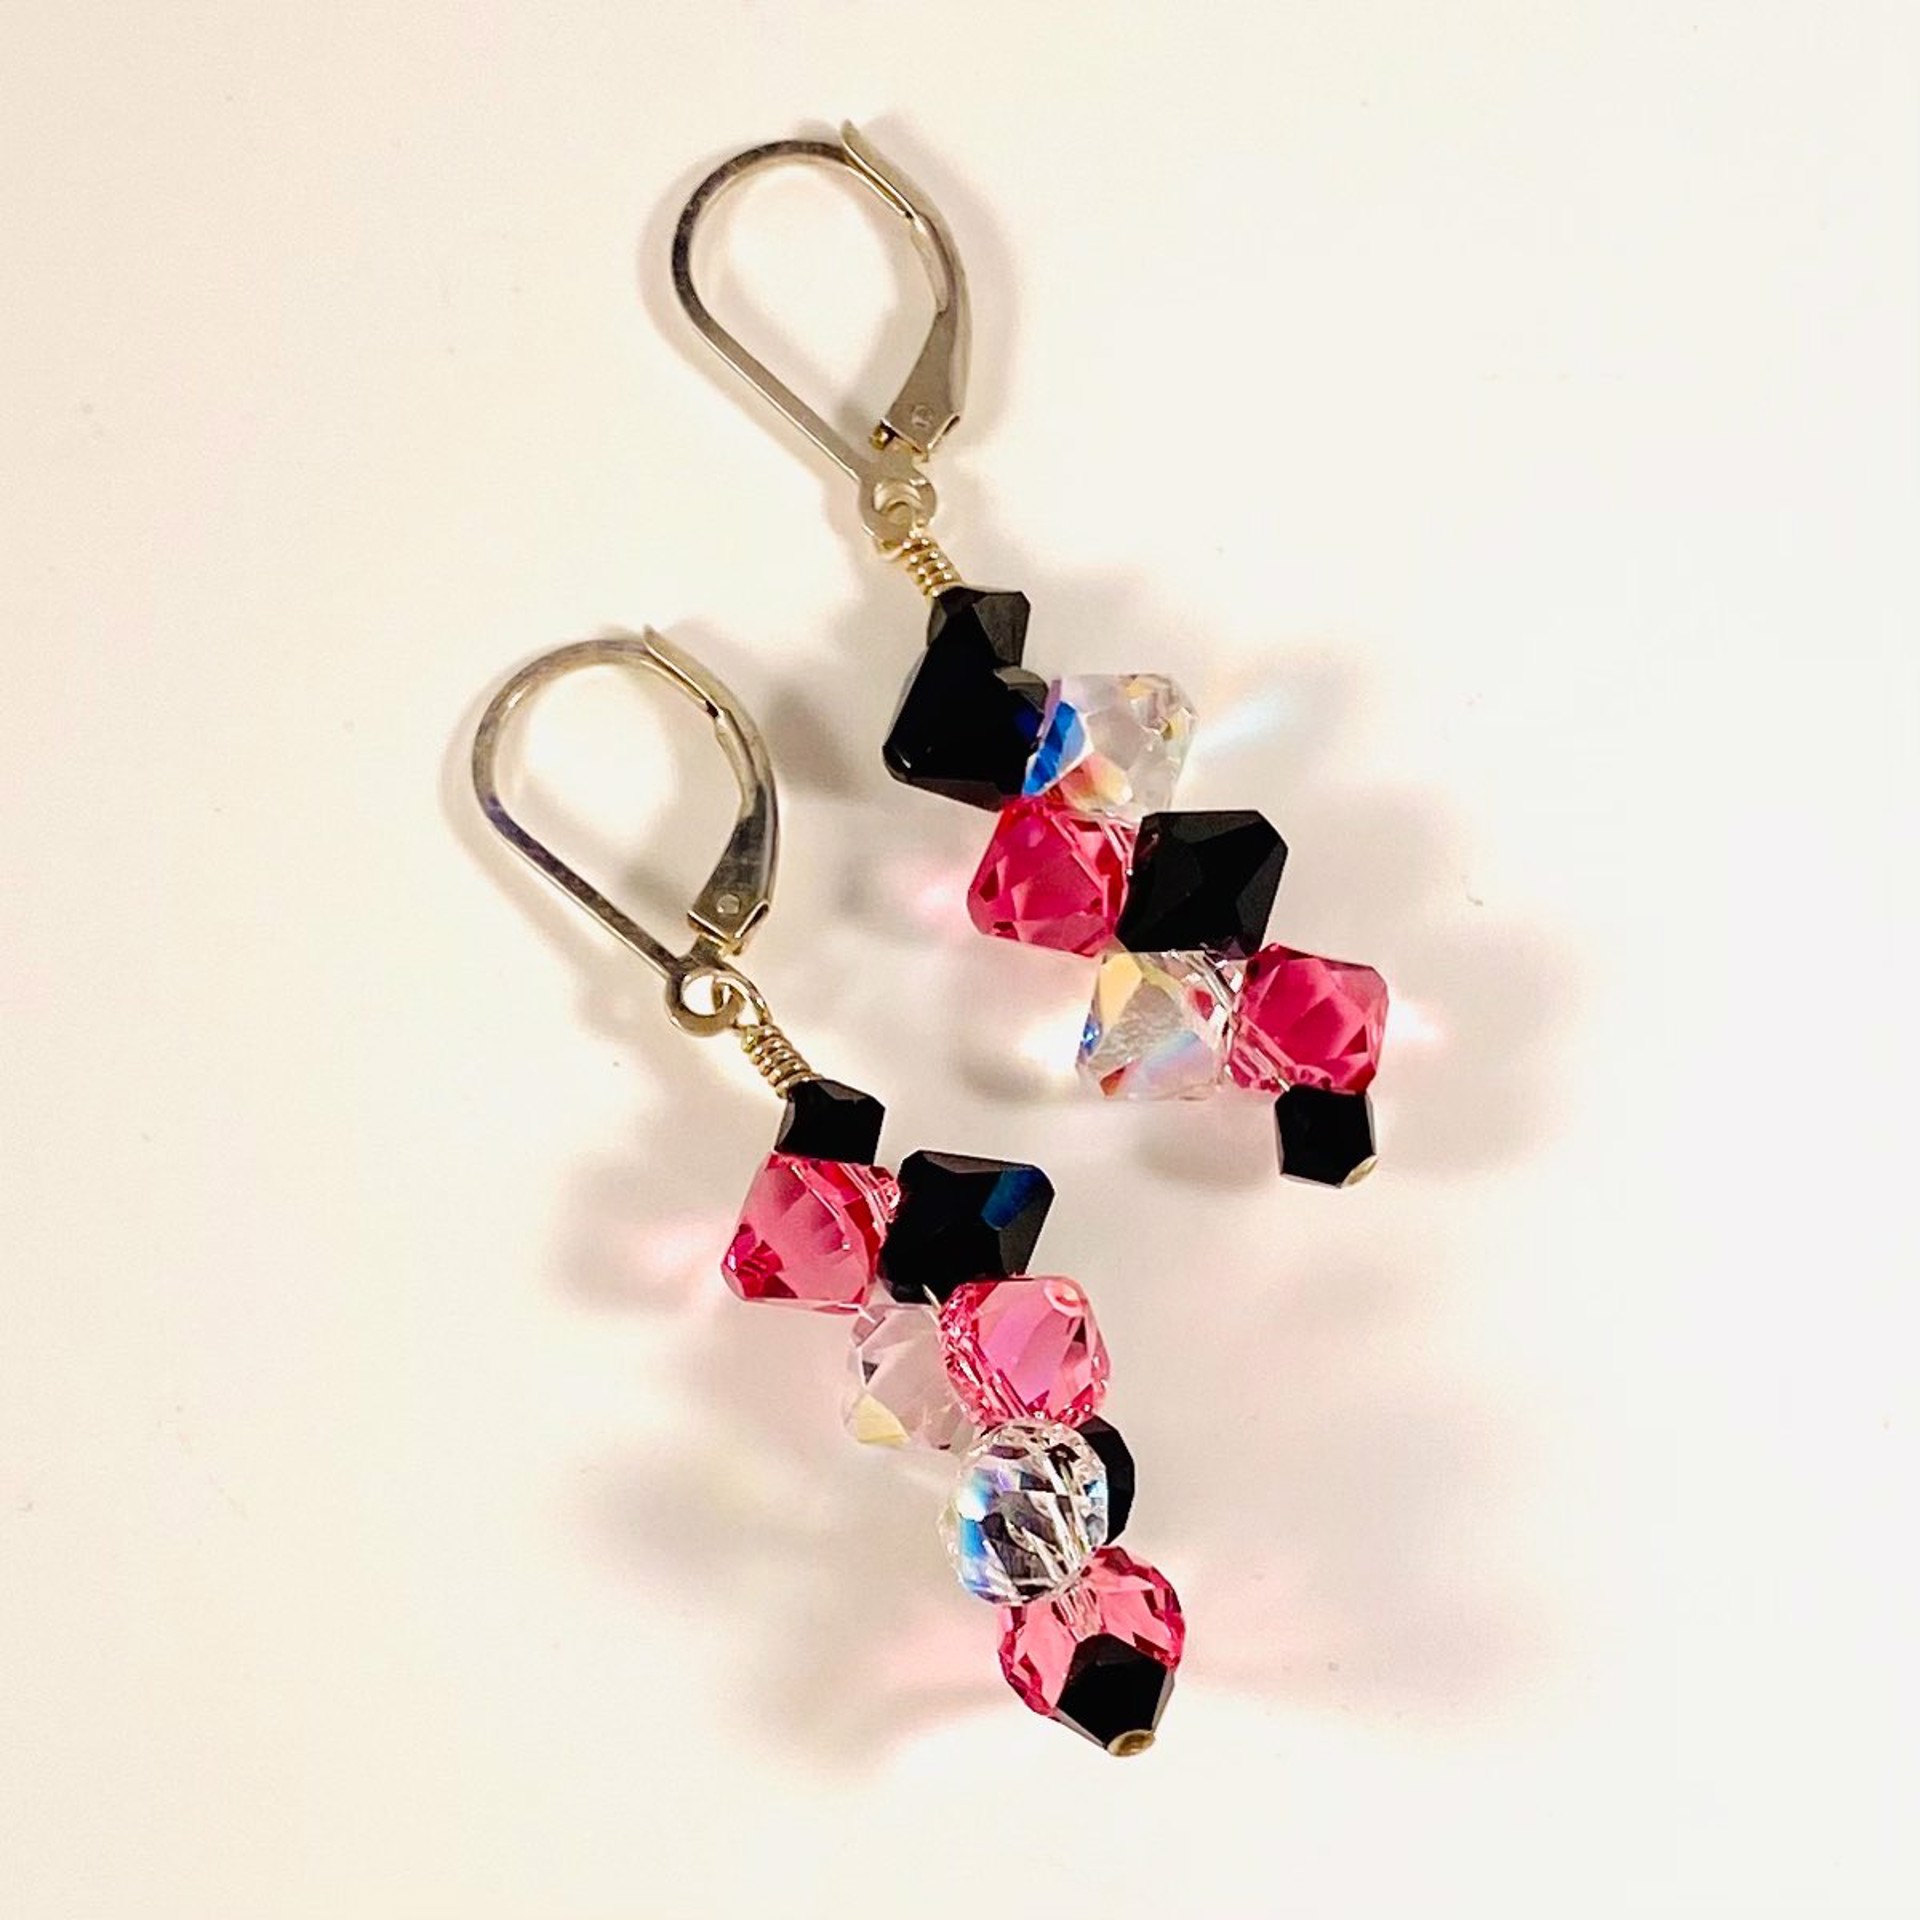 SHOSH20-43 Crystal and Silver Earrings by Shoshannah Weinisch